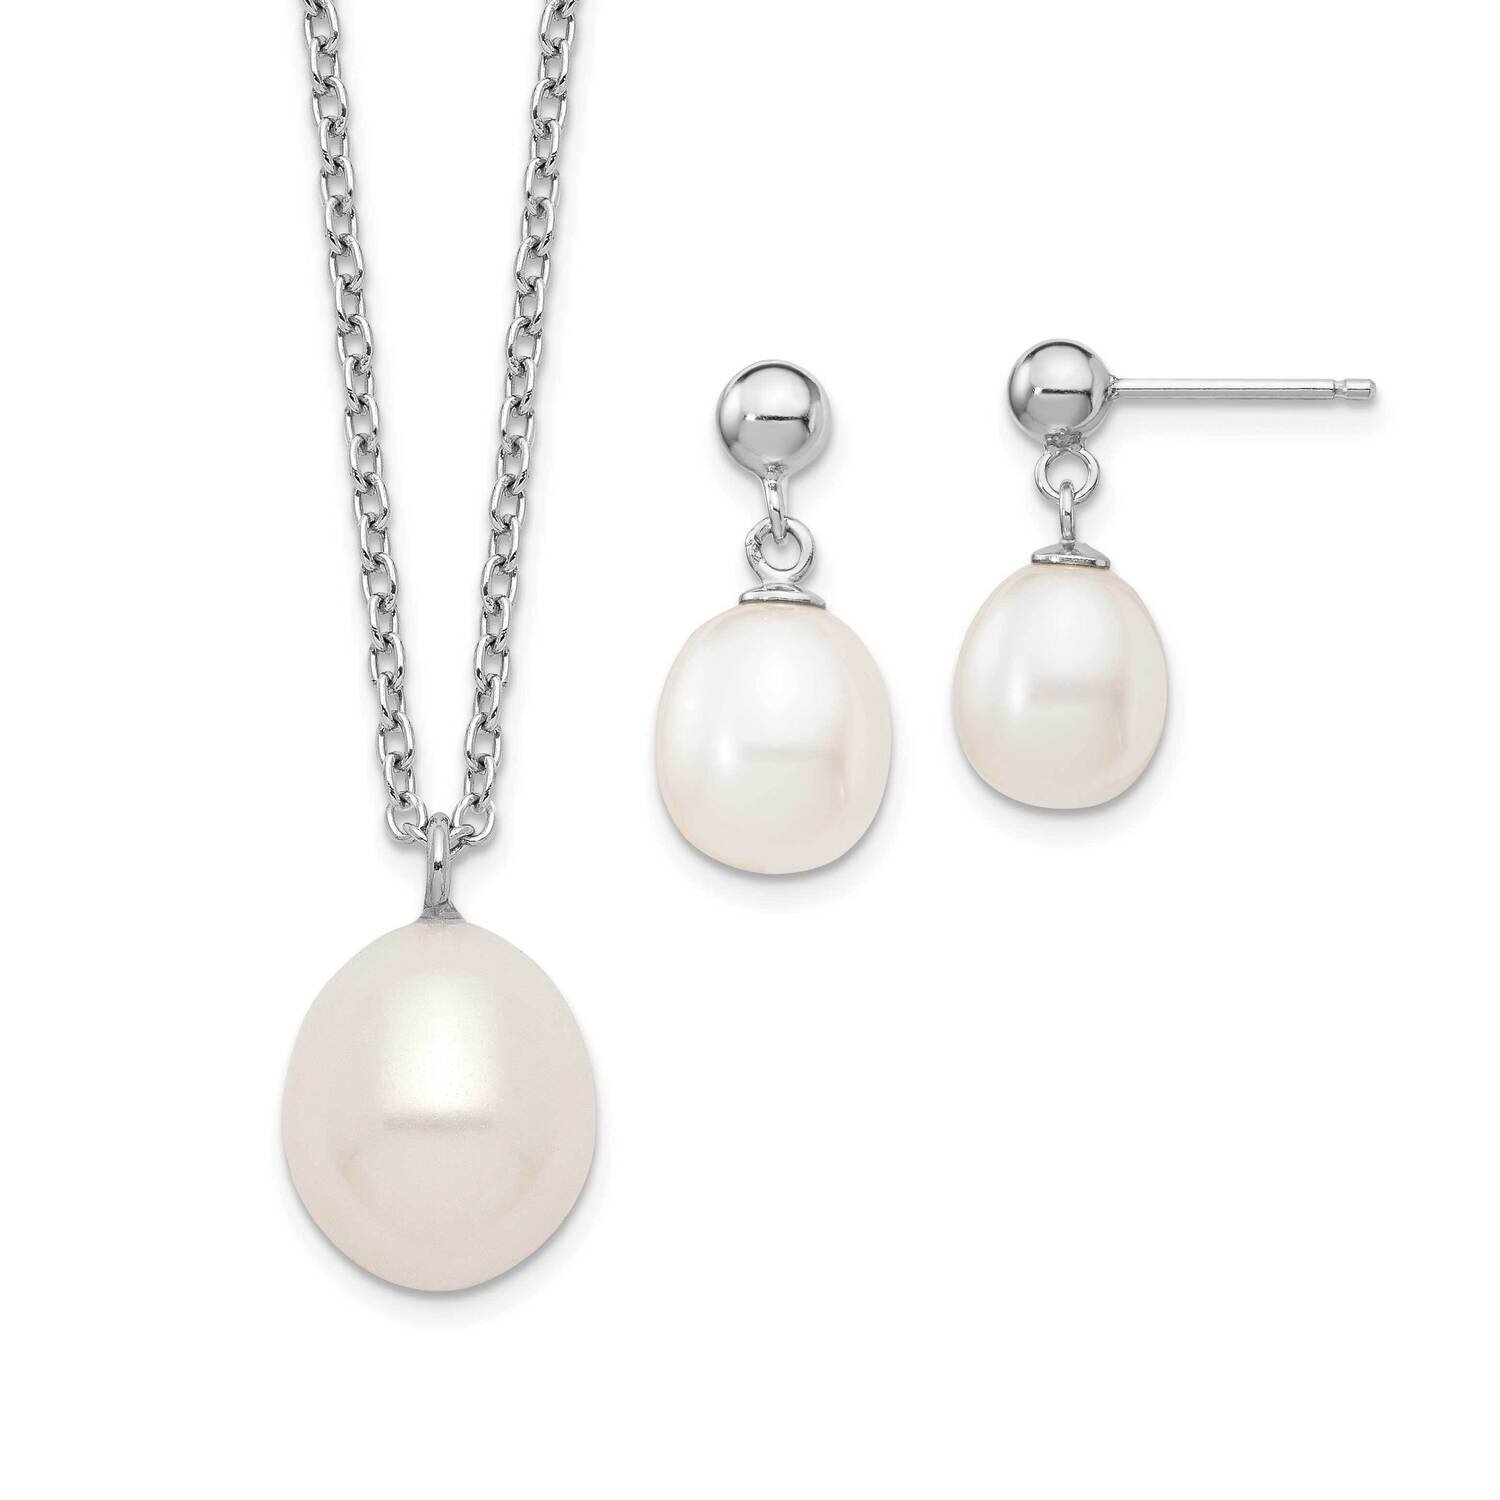 8-9mm Rice Fwc Pearl Necklace and Earrings Set Sterling Silver Rhodium-plated QG5615SET